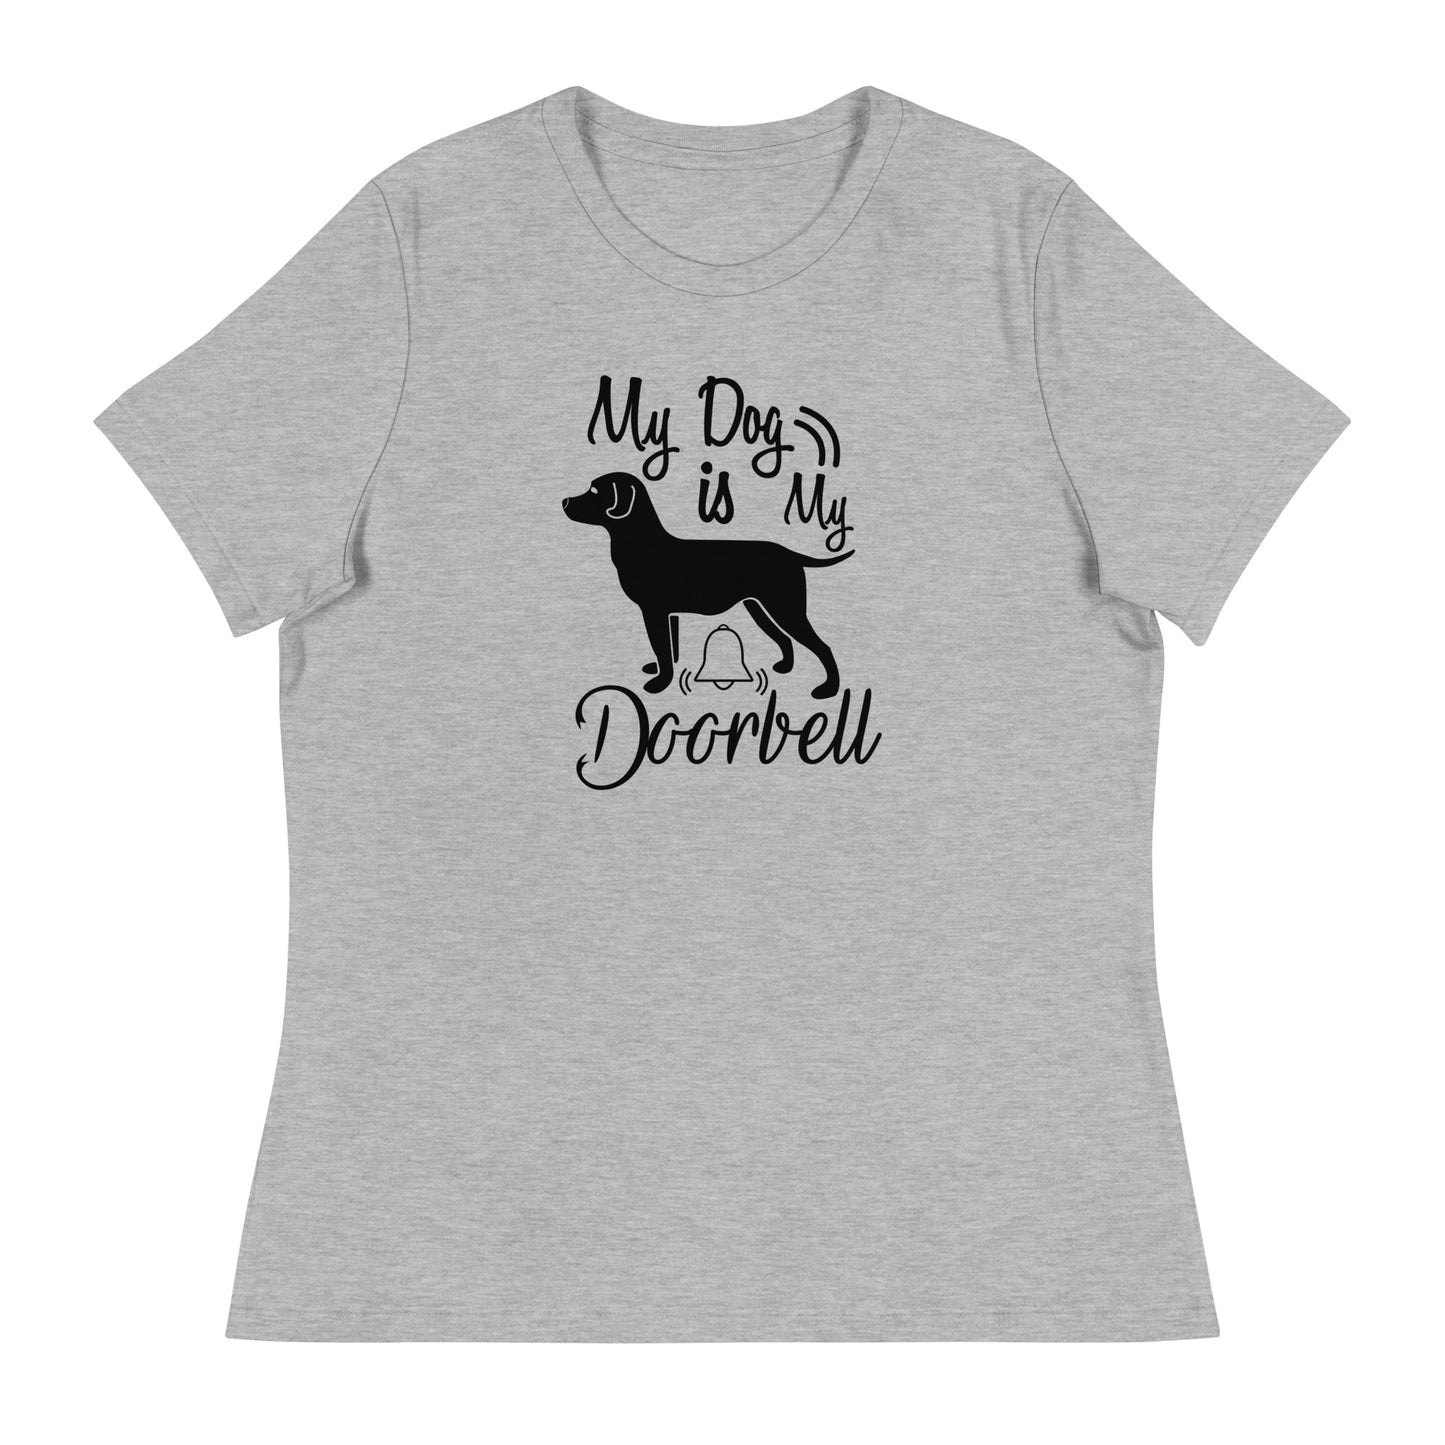 Funny Dog T-shirt Sayings - My Dog is my Door Bell